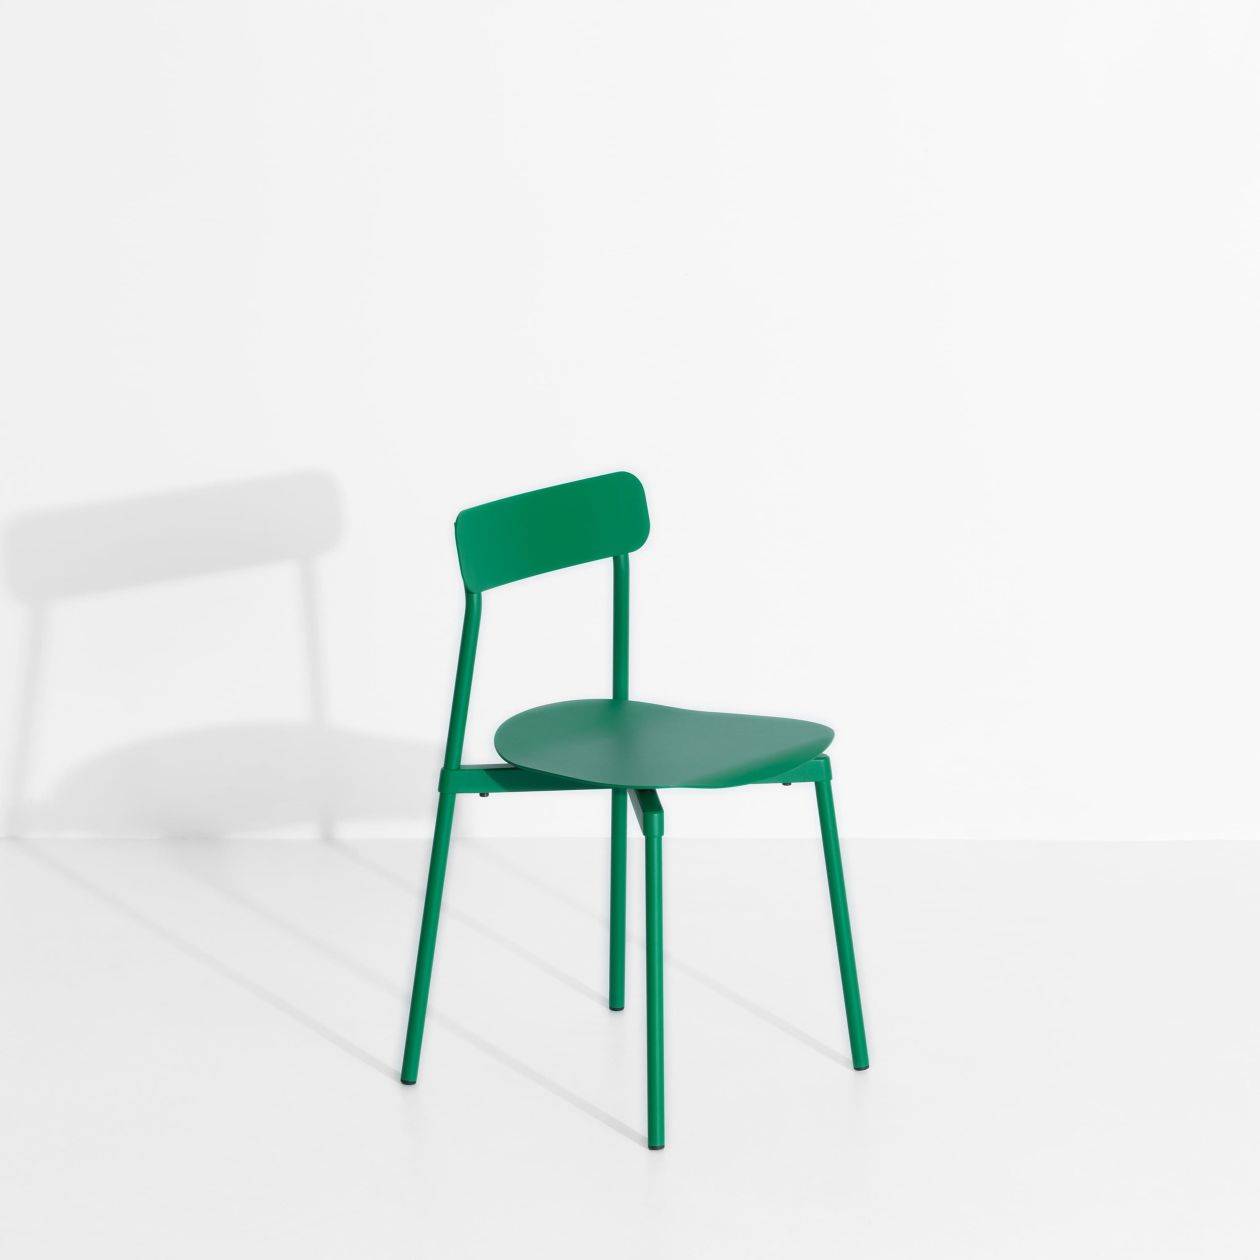 Fromme Chair - Mint green